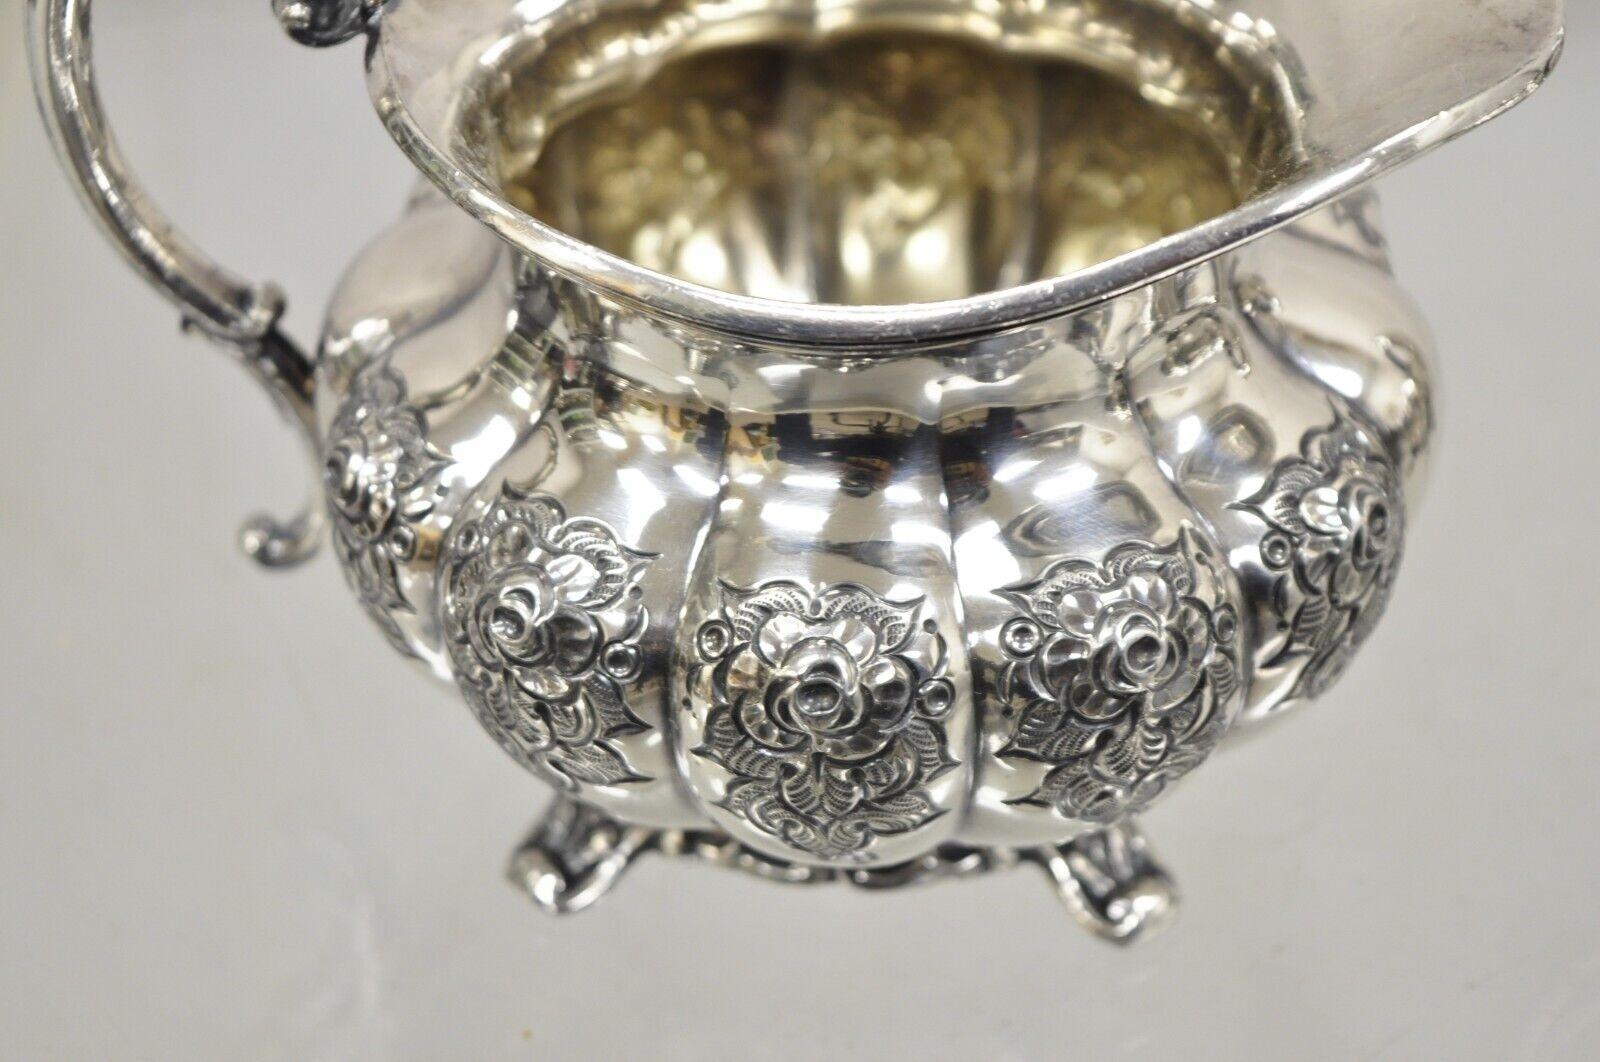 20th Century Vintage Victorian 1881 Rogers Canada Silver Plated Sugar Bowl and Creamer Set For Sale